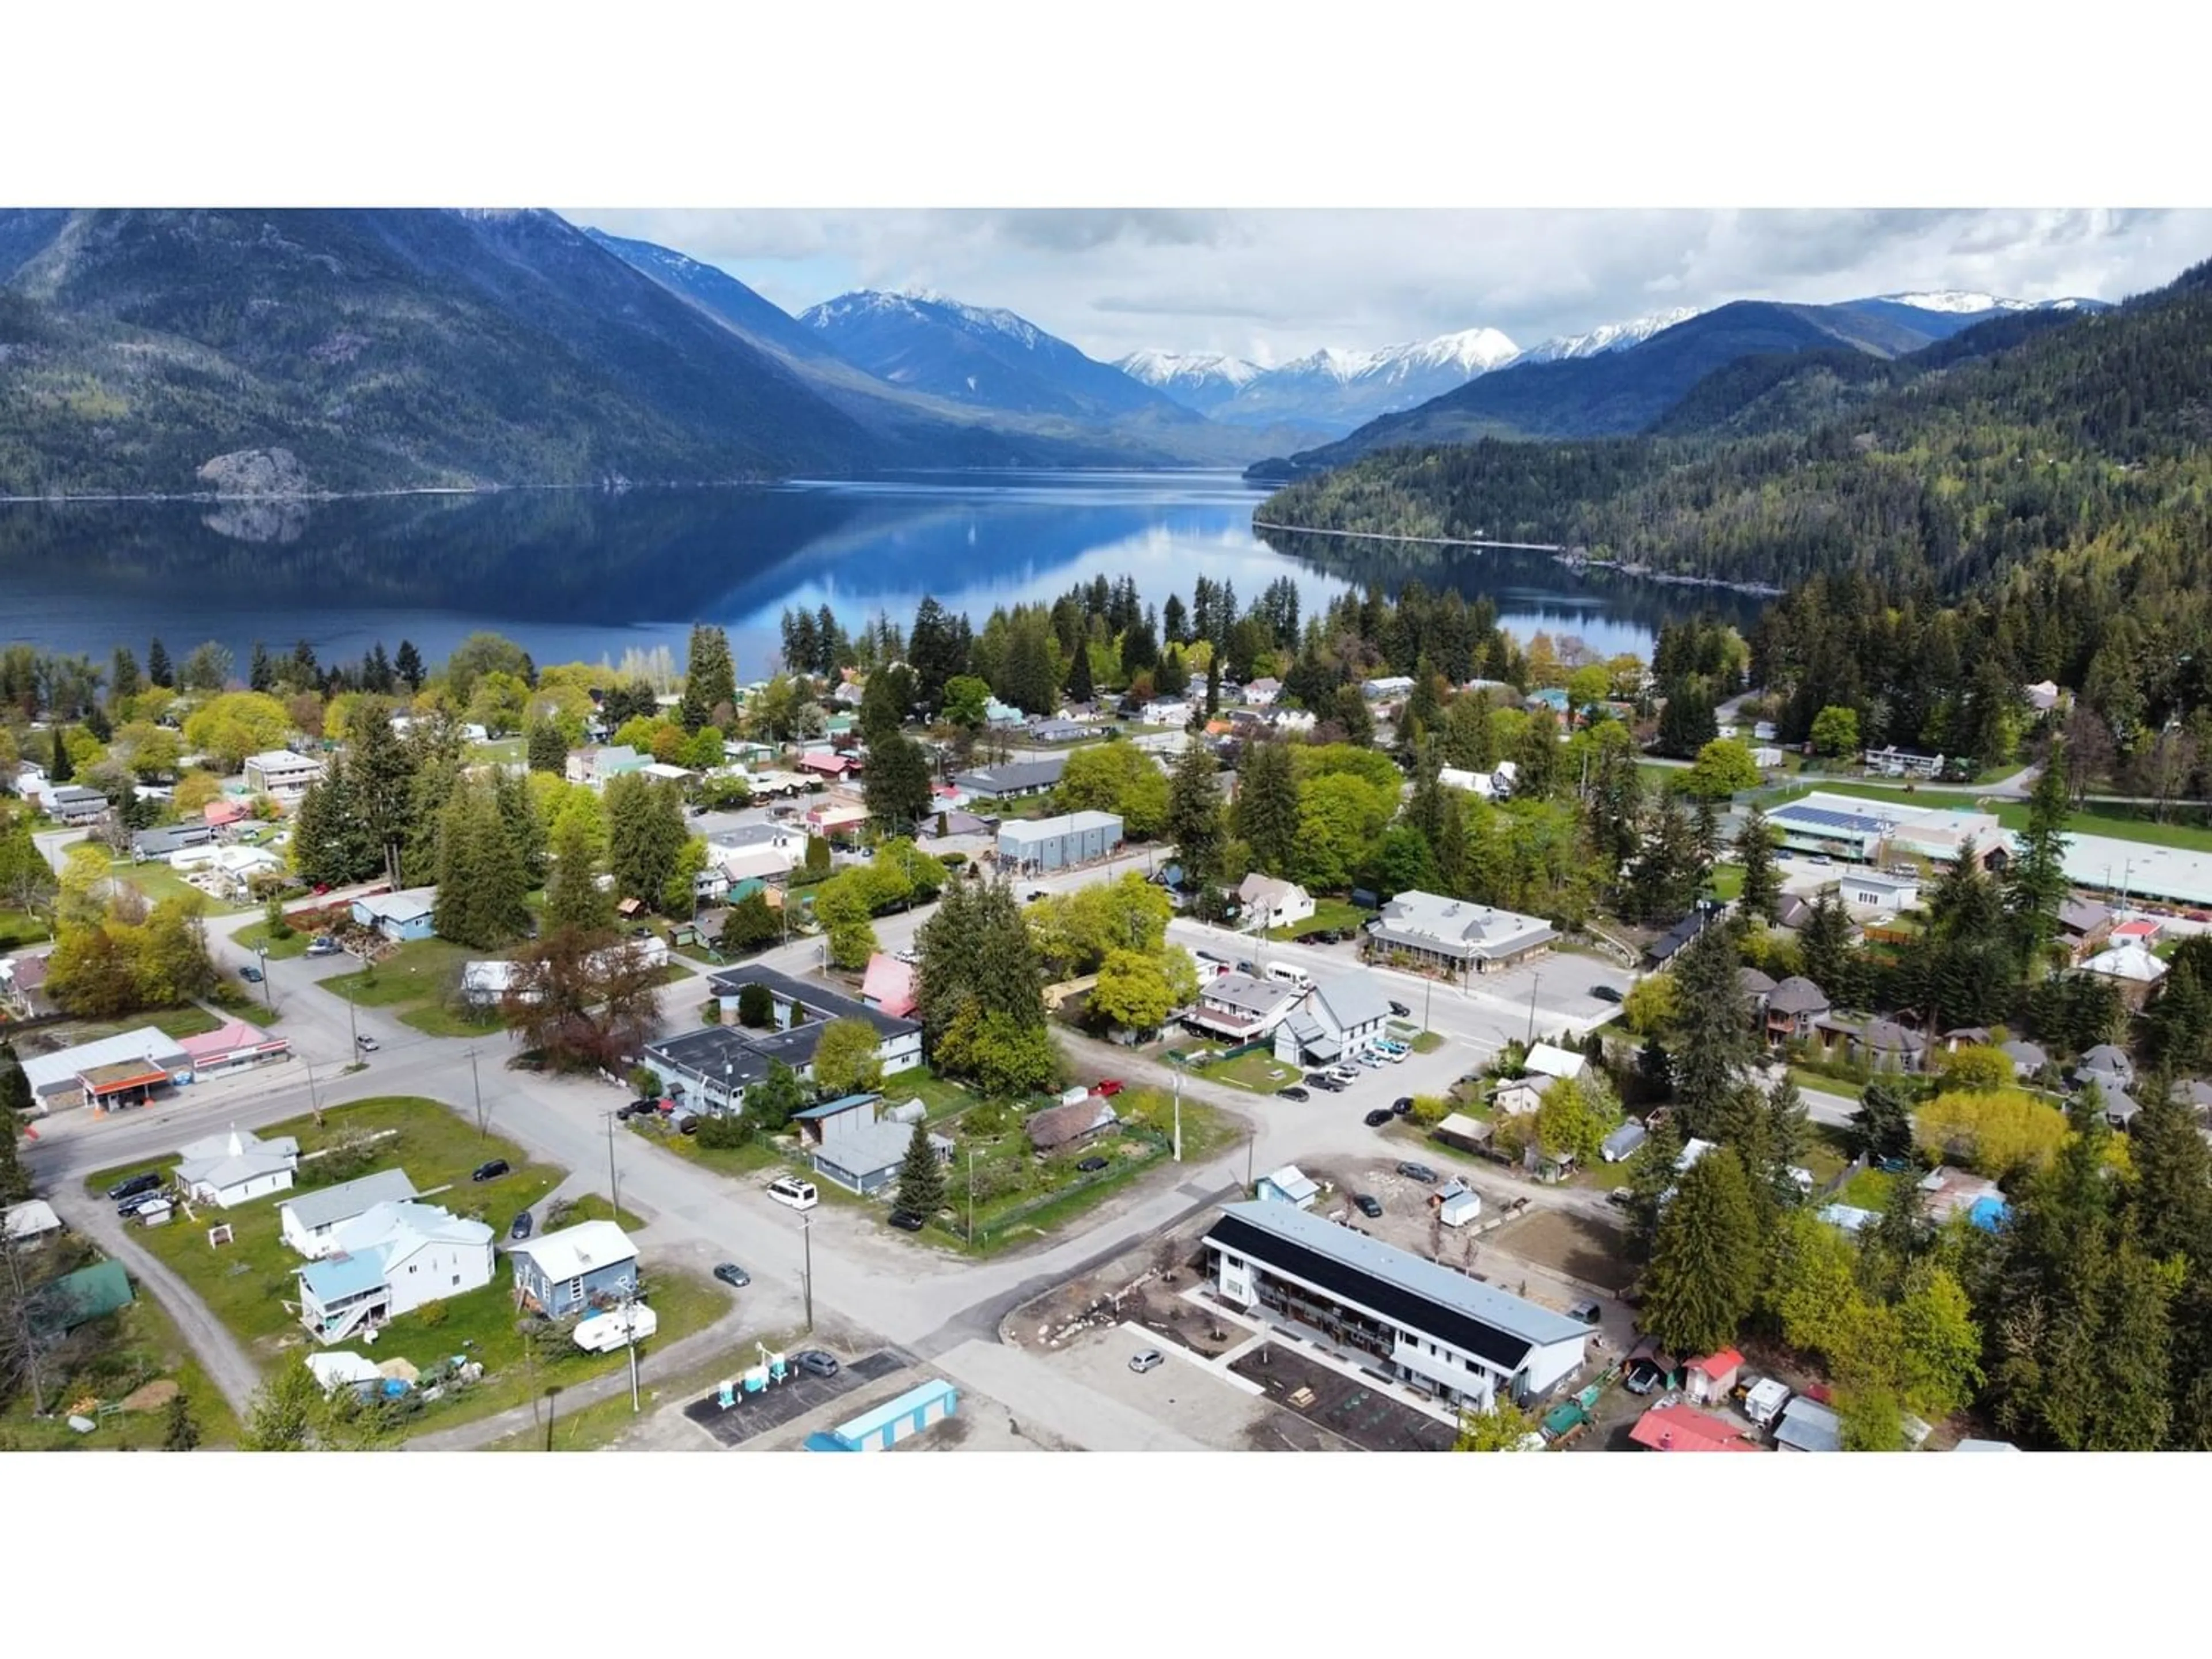 Lakeview for 516 SLOCAN AVENUE, New Denver British Columbia V0G1S0